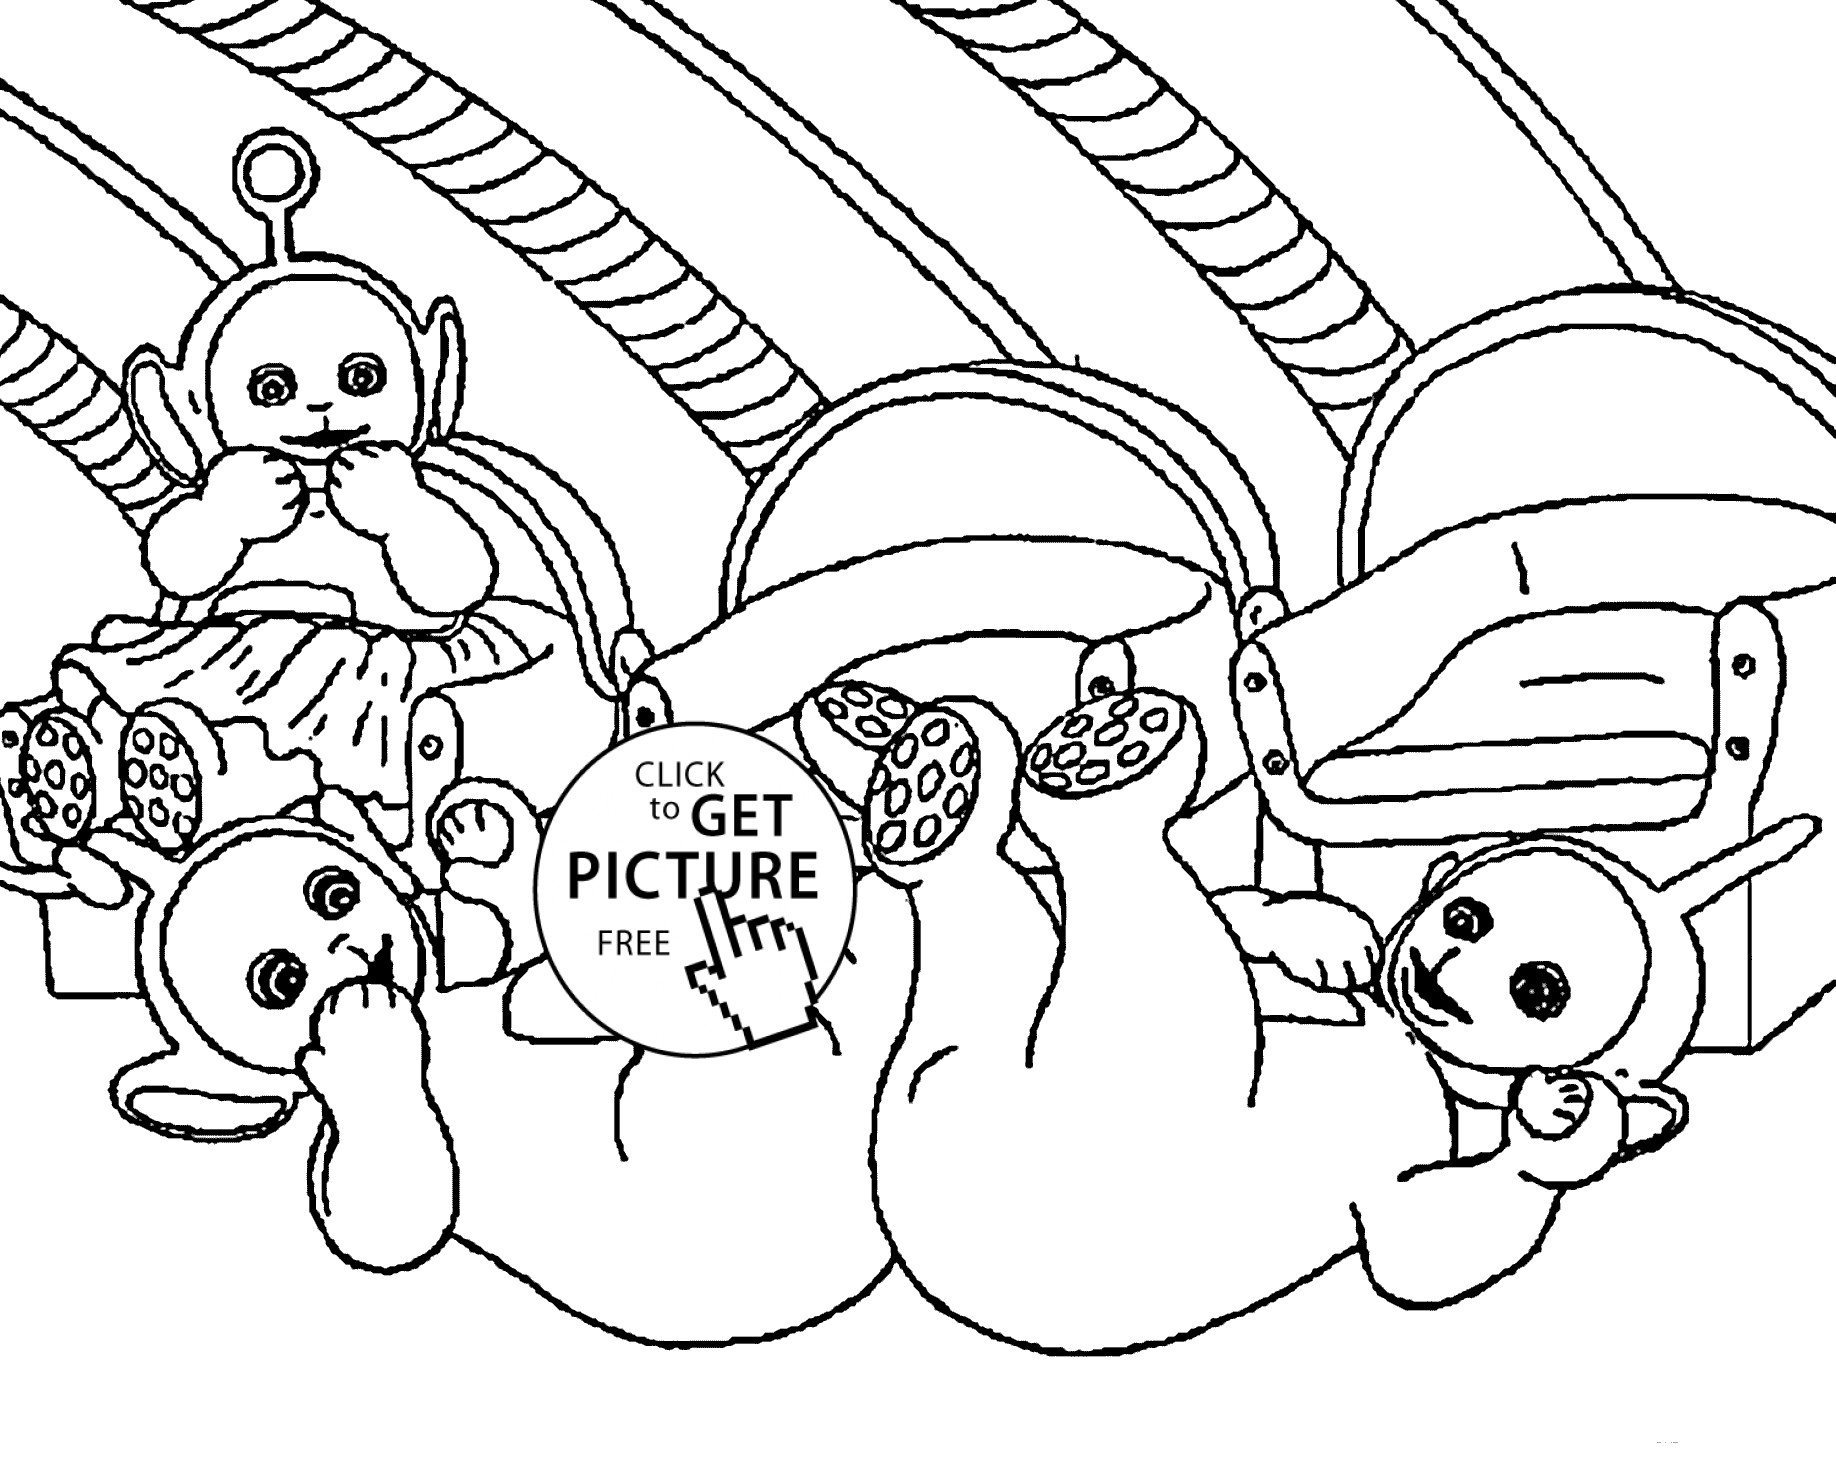 Teletubbies Coloring Pages at GetDrawings | Free download